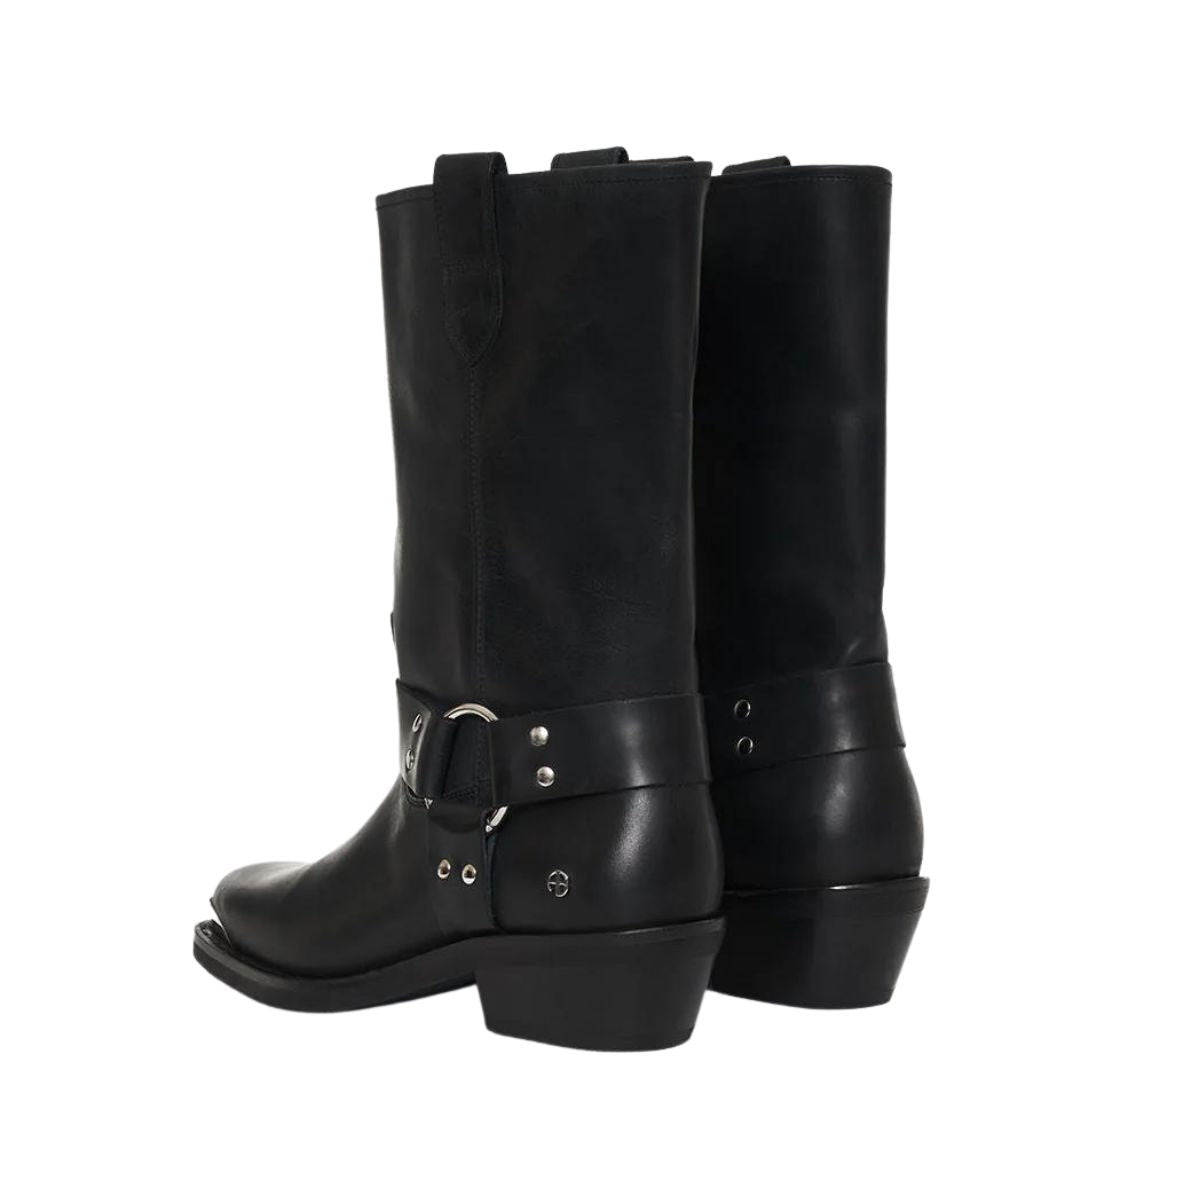 Anine Bing Ryder Boots in Black